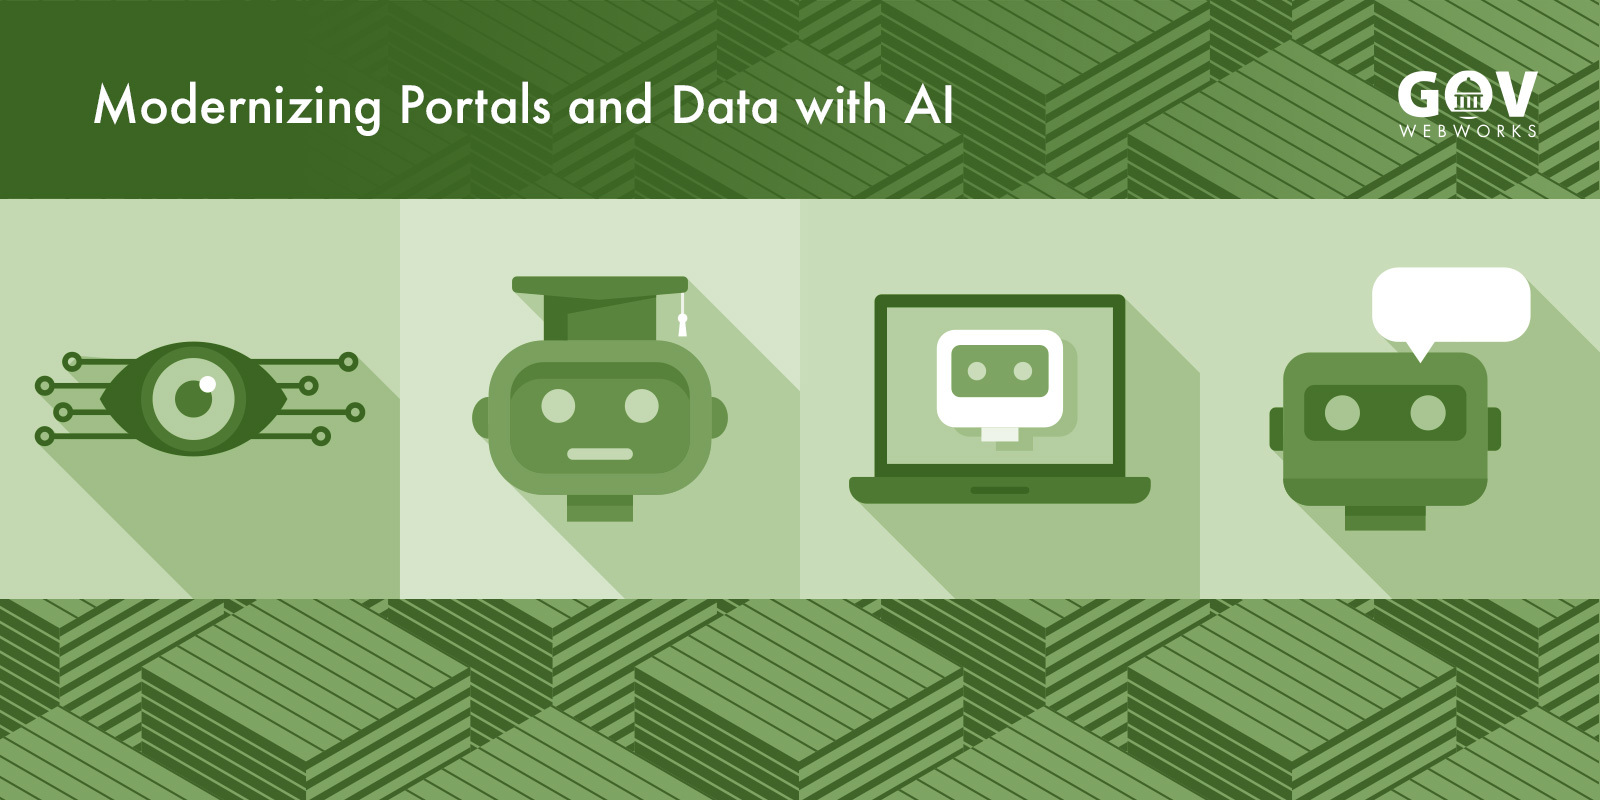 Modernizing Portals and Data with AI